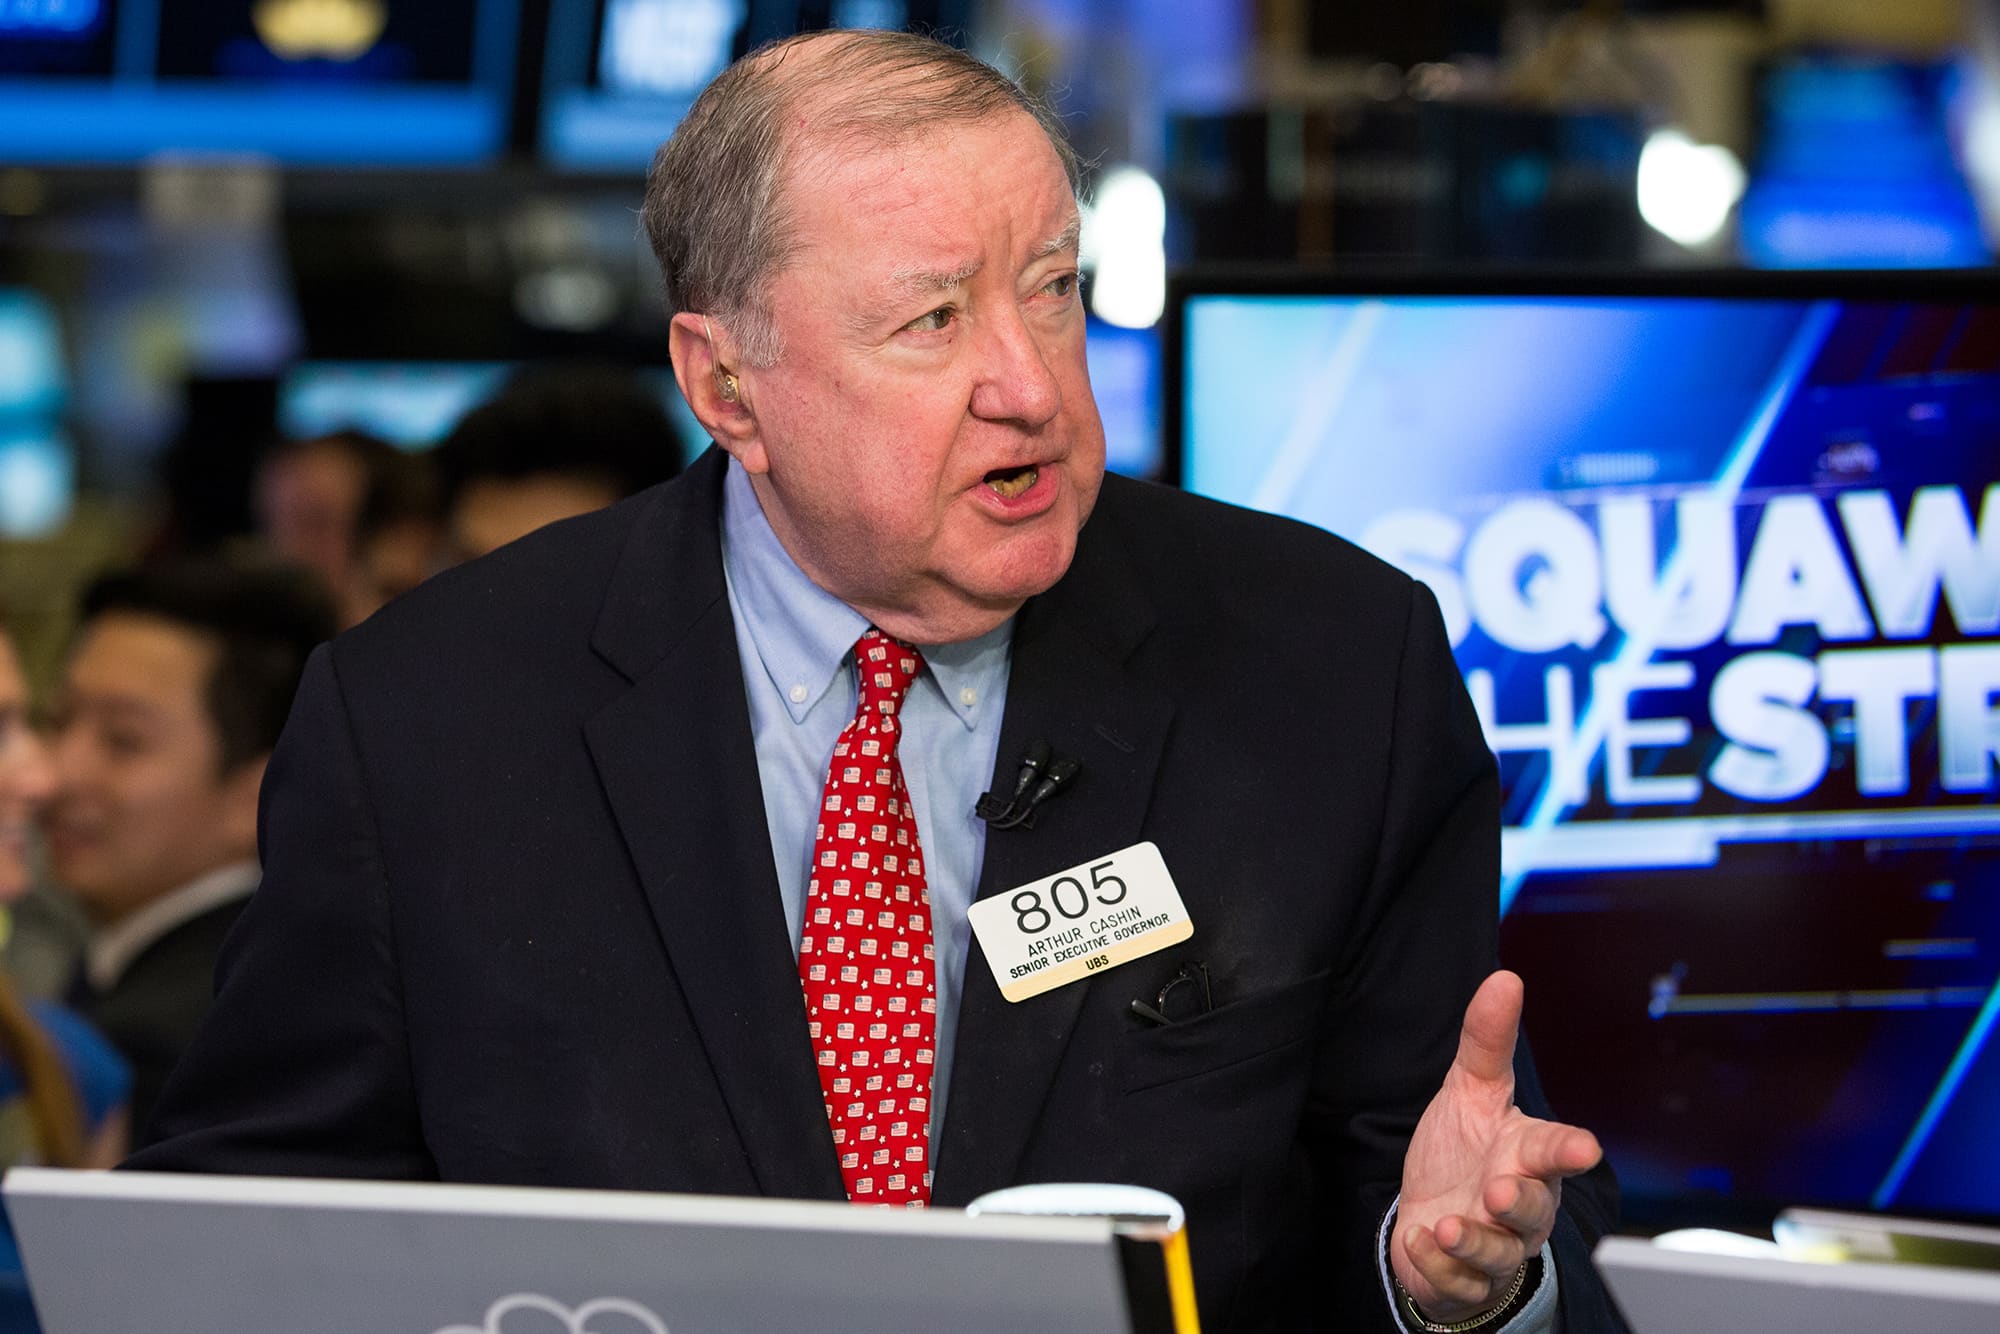 These are the key levels that UBS's Art Cashin will be watching as the January rally unfolds